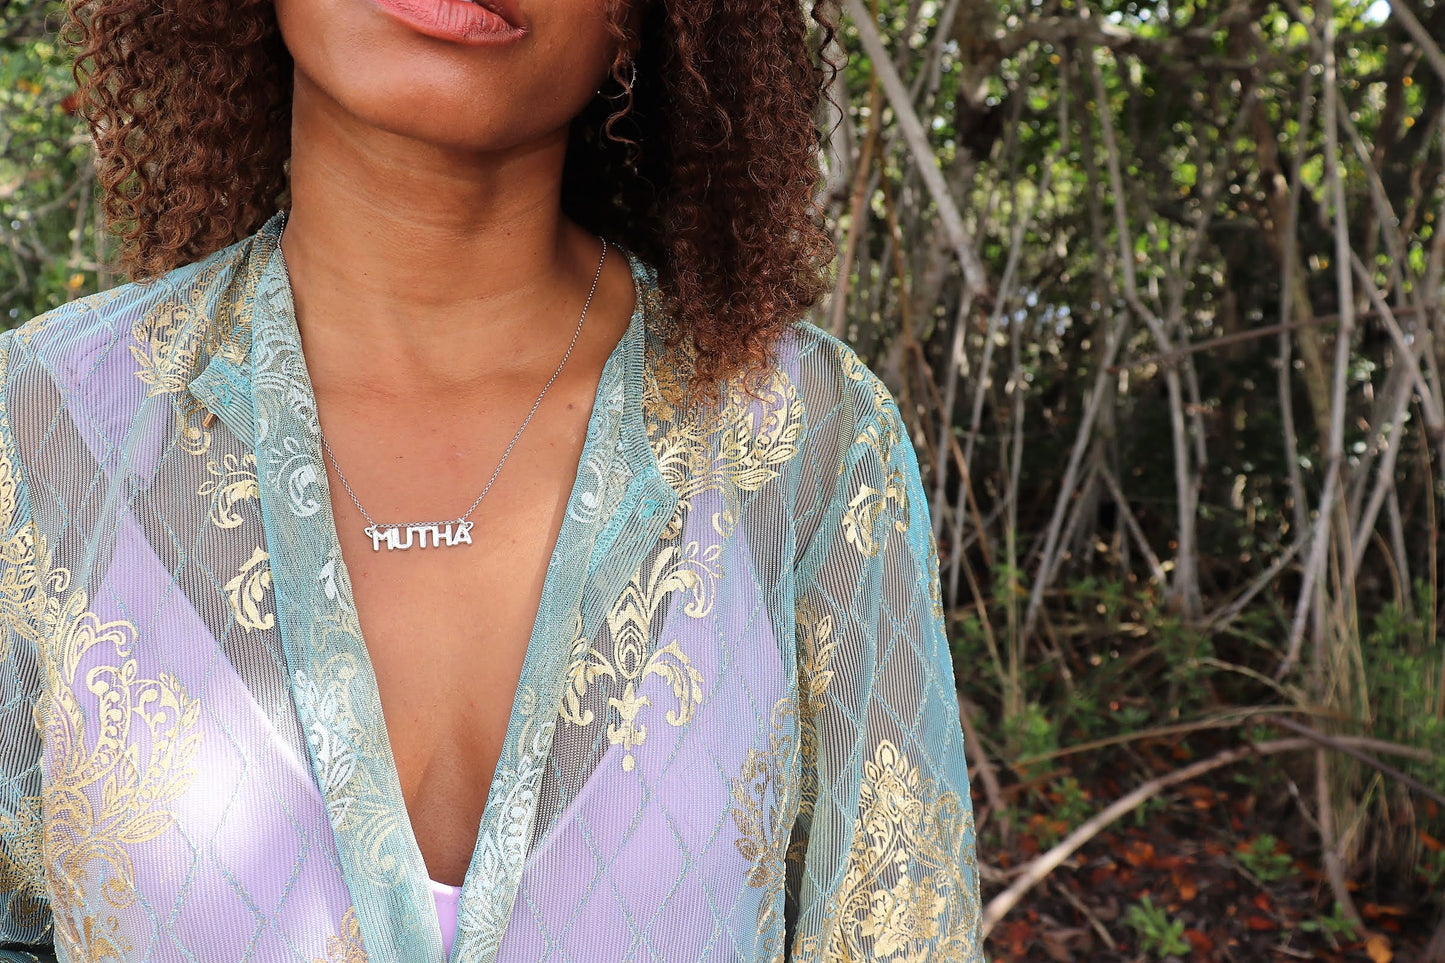 black woman in forest wearing a green and purple blouse over a lavender tank wearing mutha mother necklace